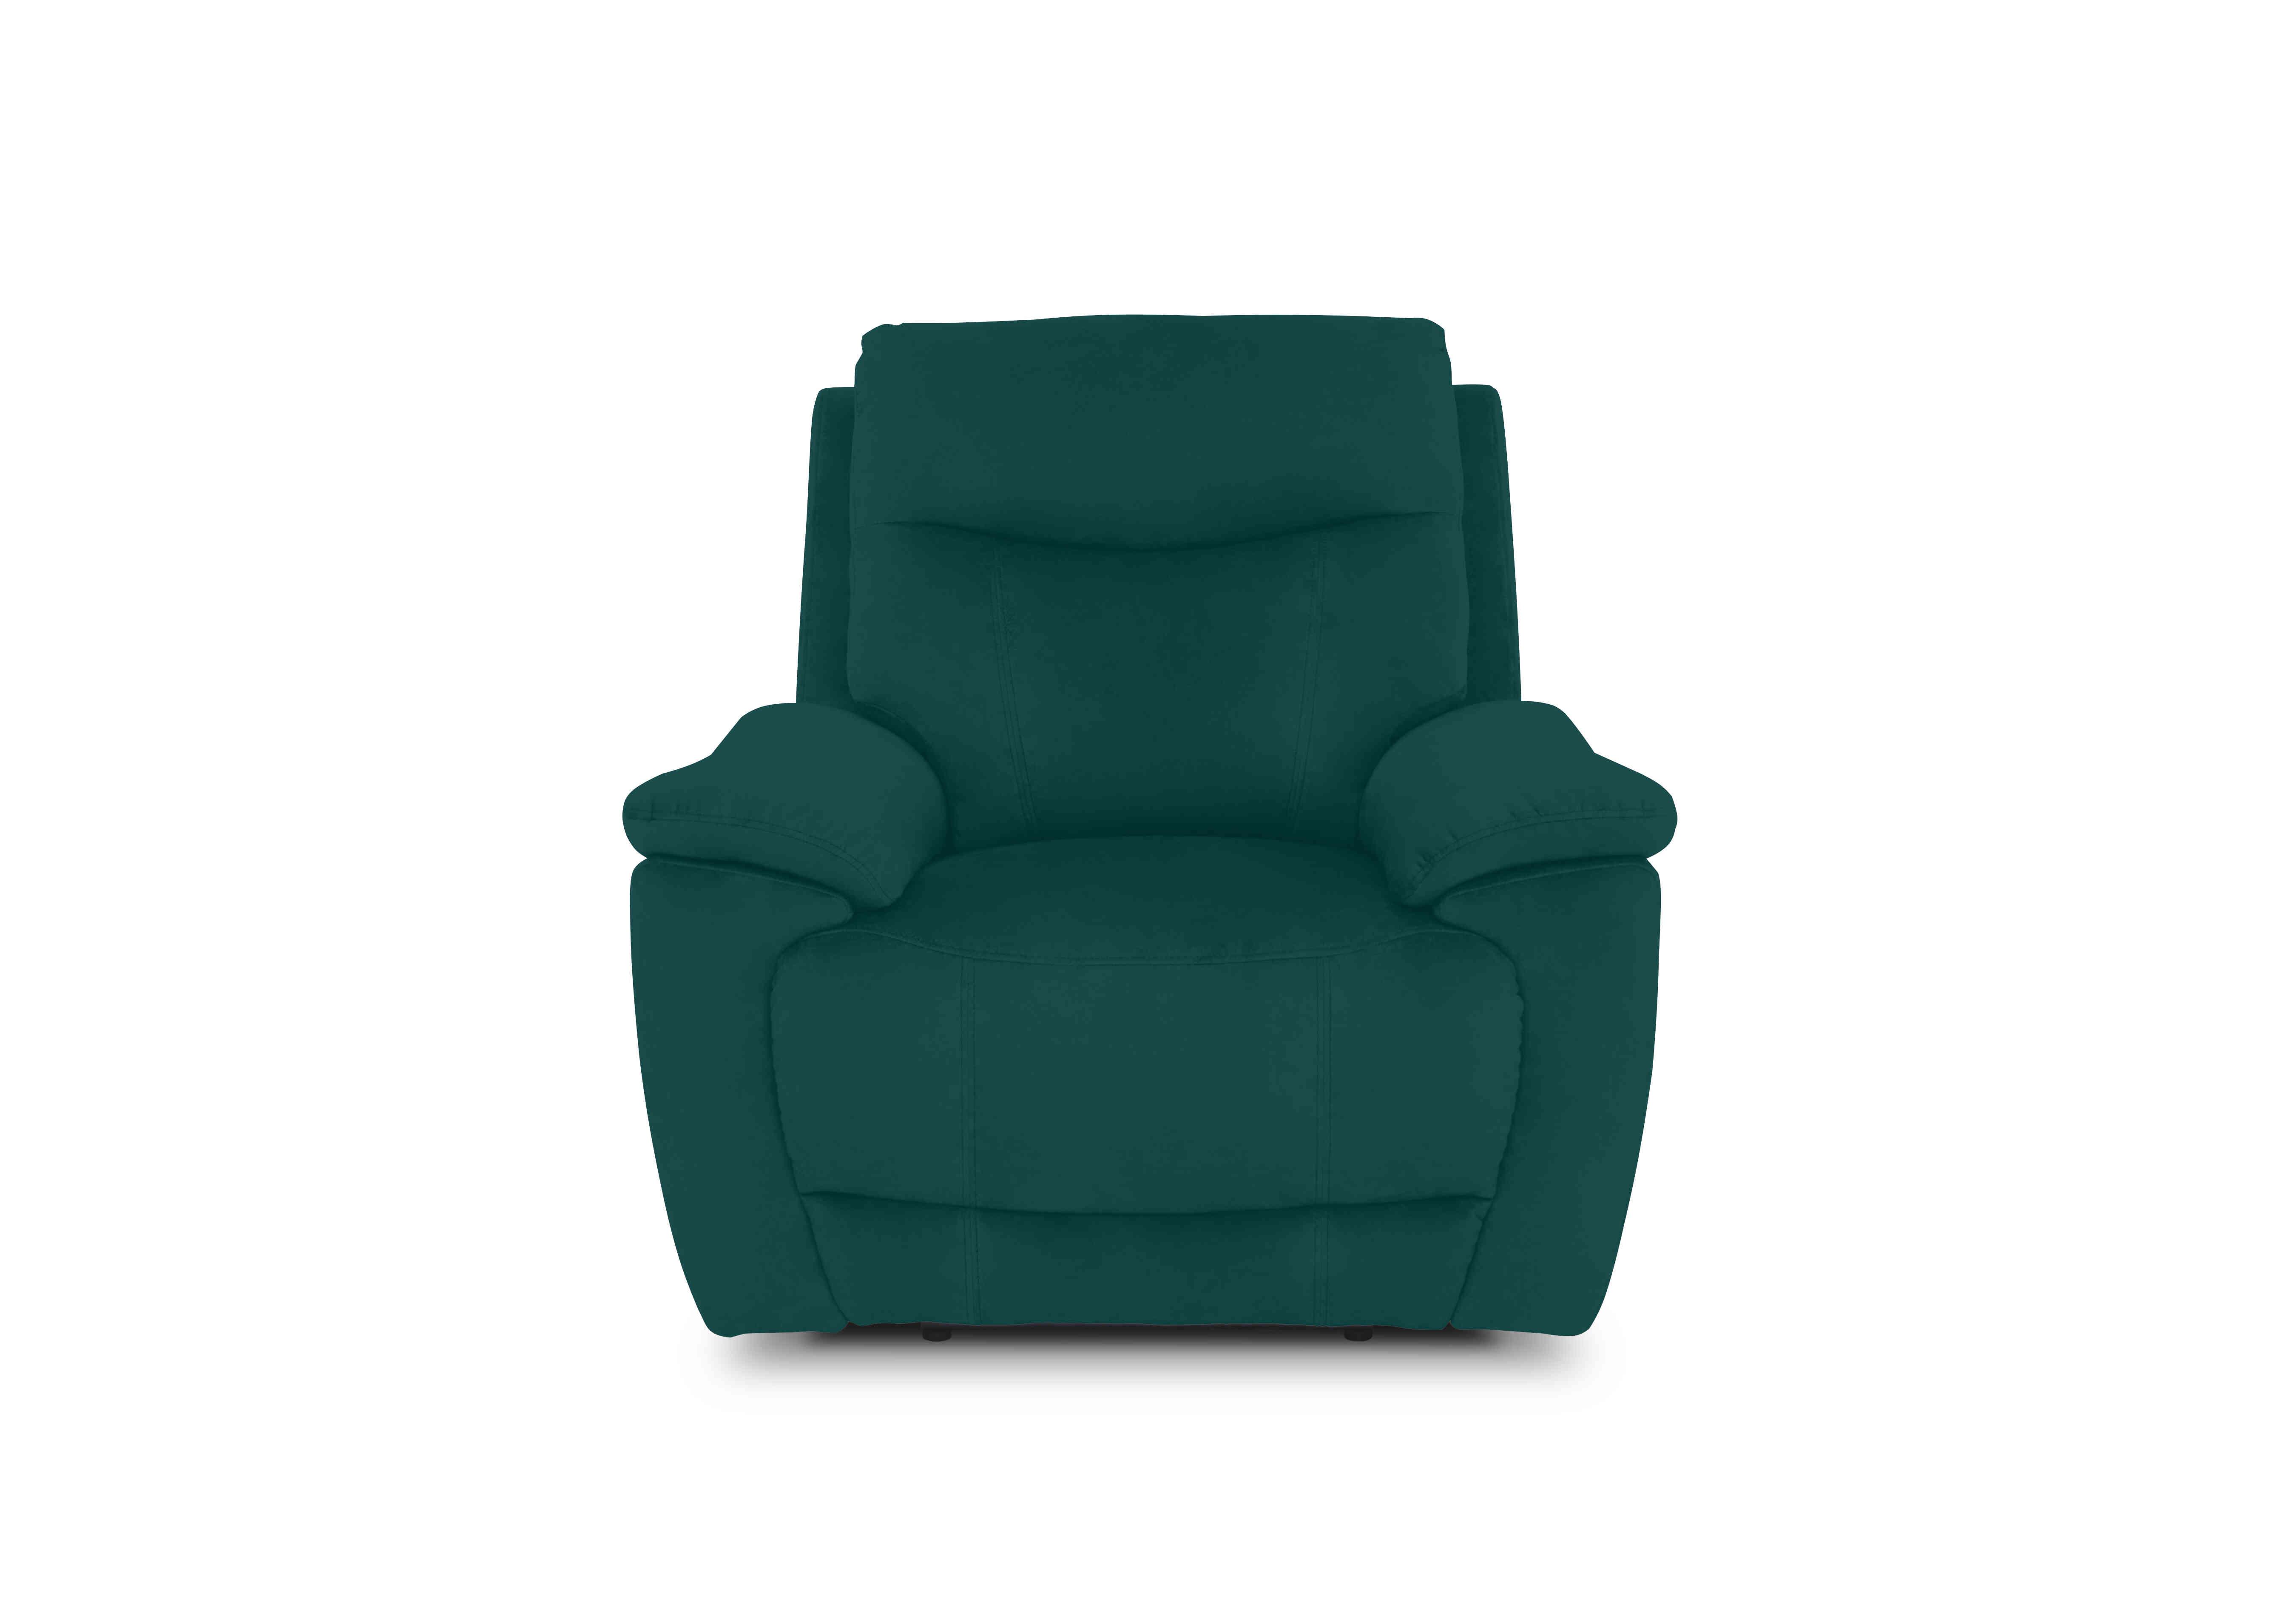 Sloane Fabric Chair in 51003 Opulence Teal on Furniture Village